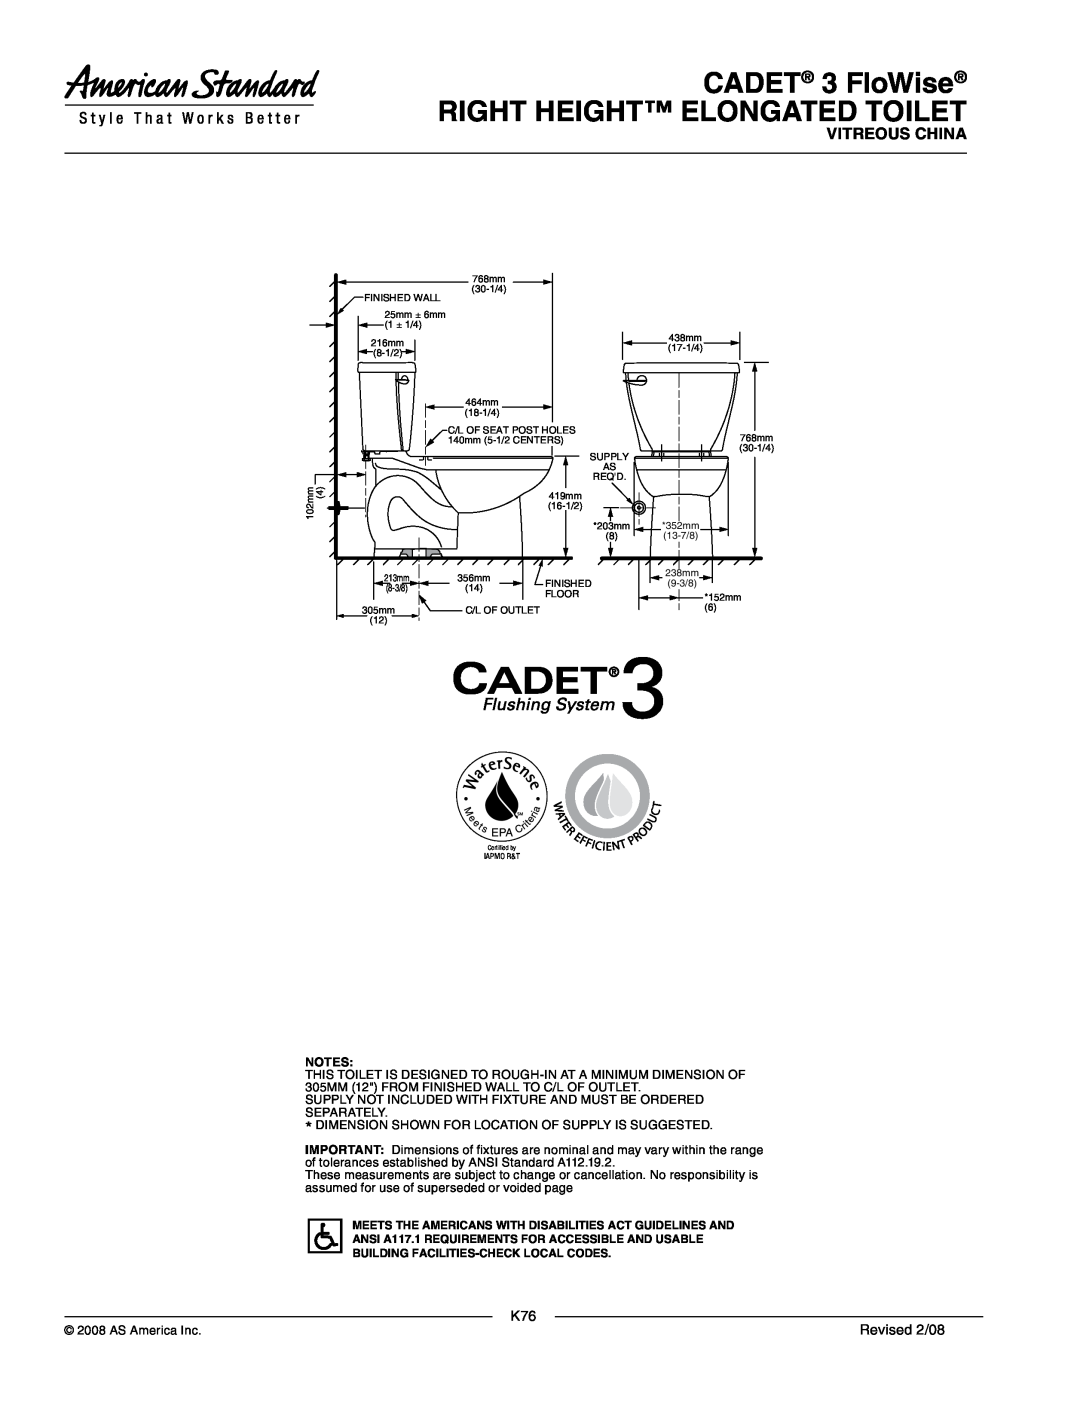 American Standard 2835.128, 3016.128 dimensions CADET 3 FloWise RIGHT HEIGHT ELONGATED TOILET, Vitreous China, Revised 2/08 